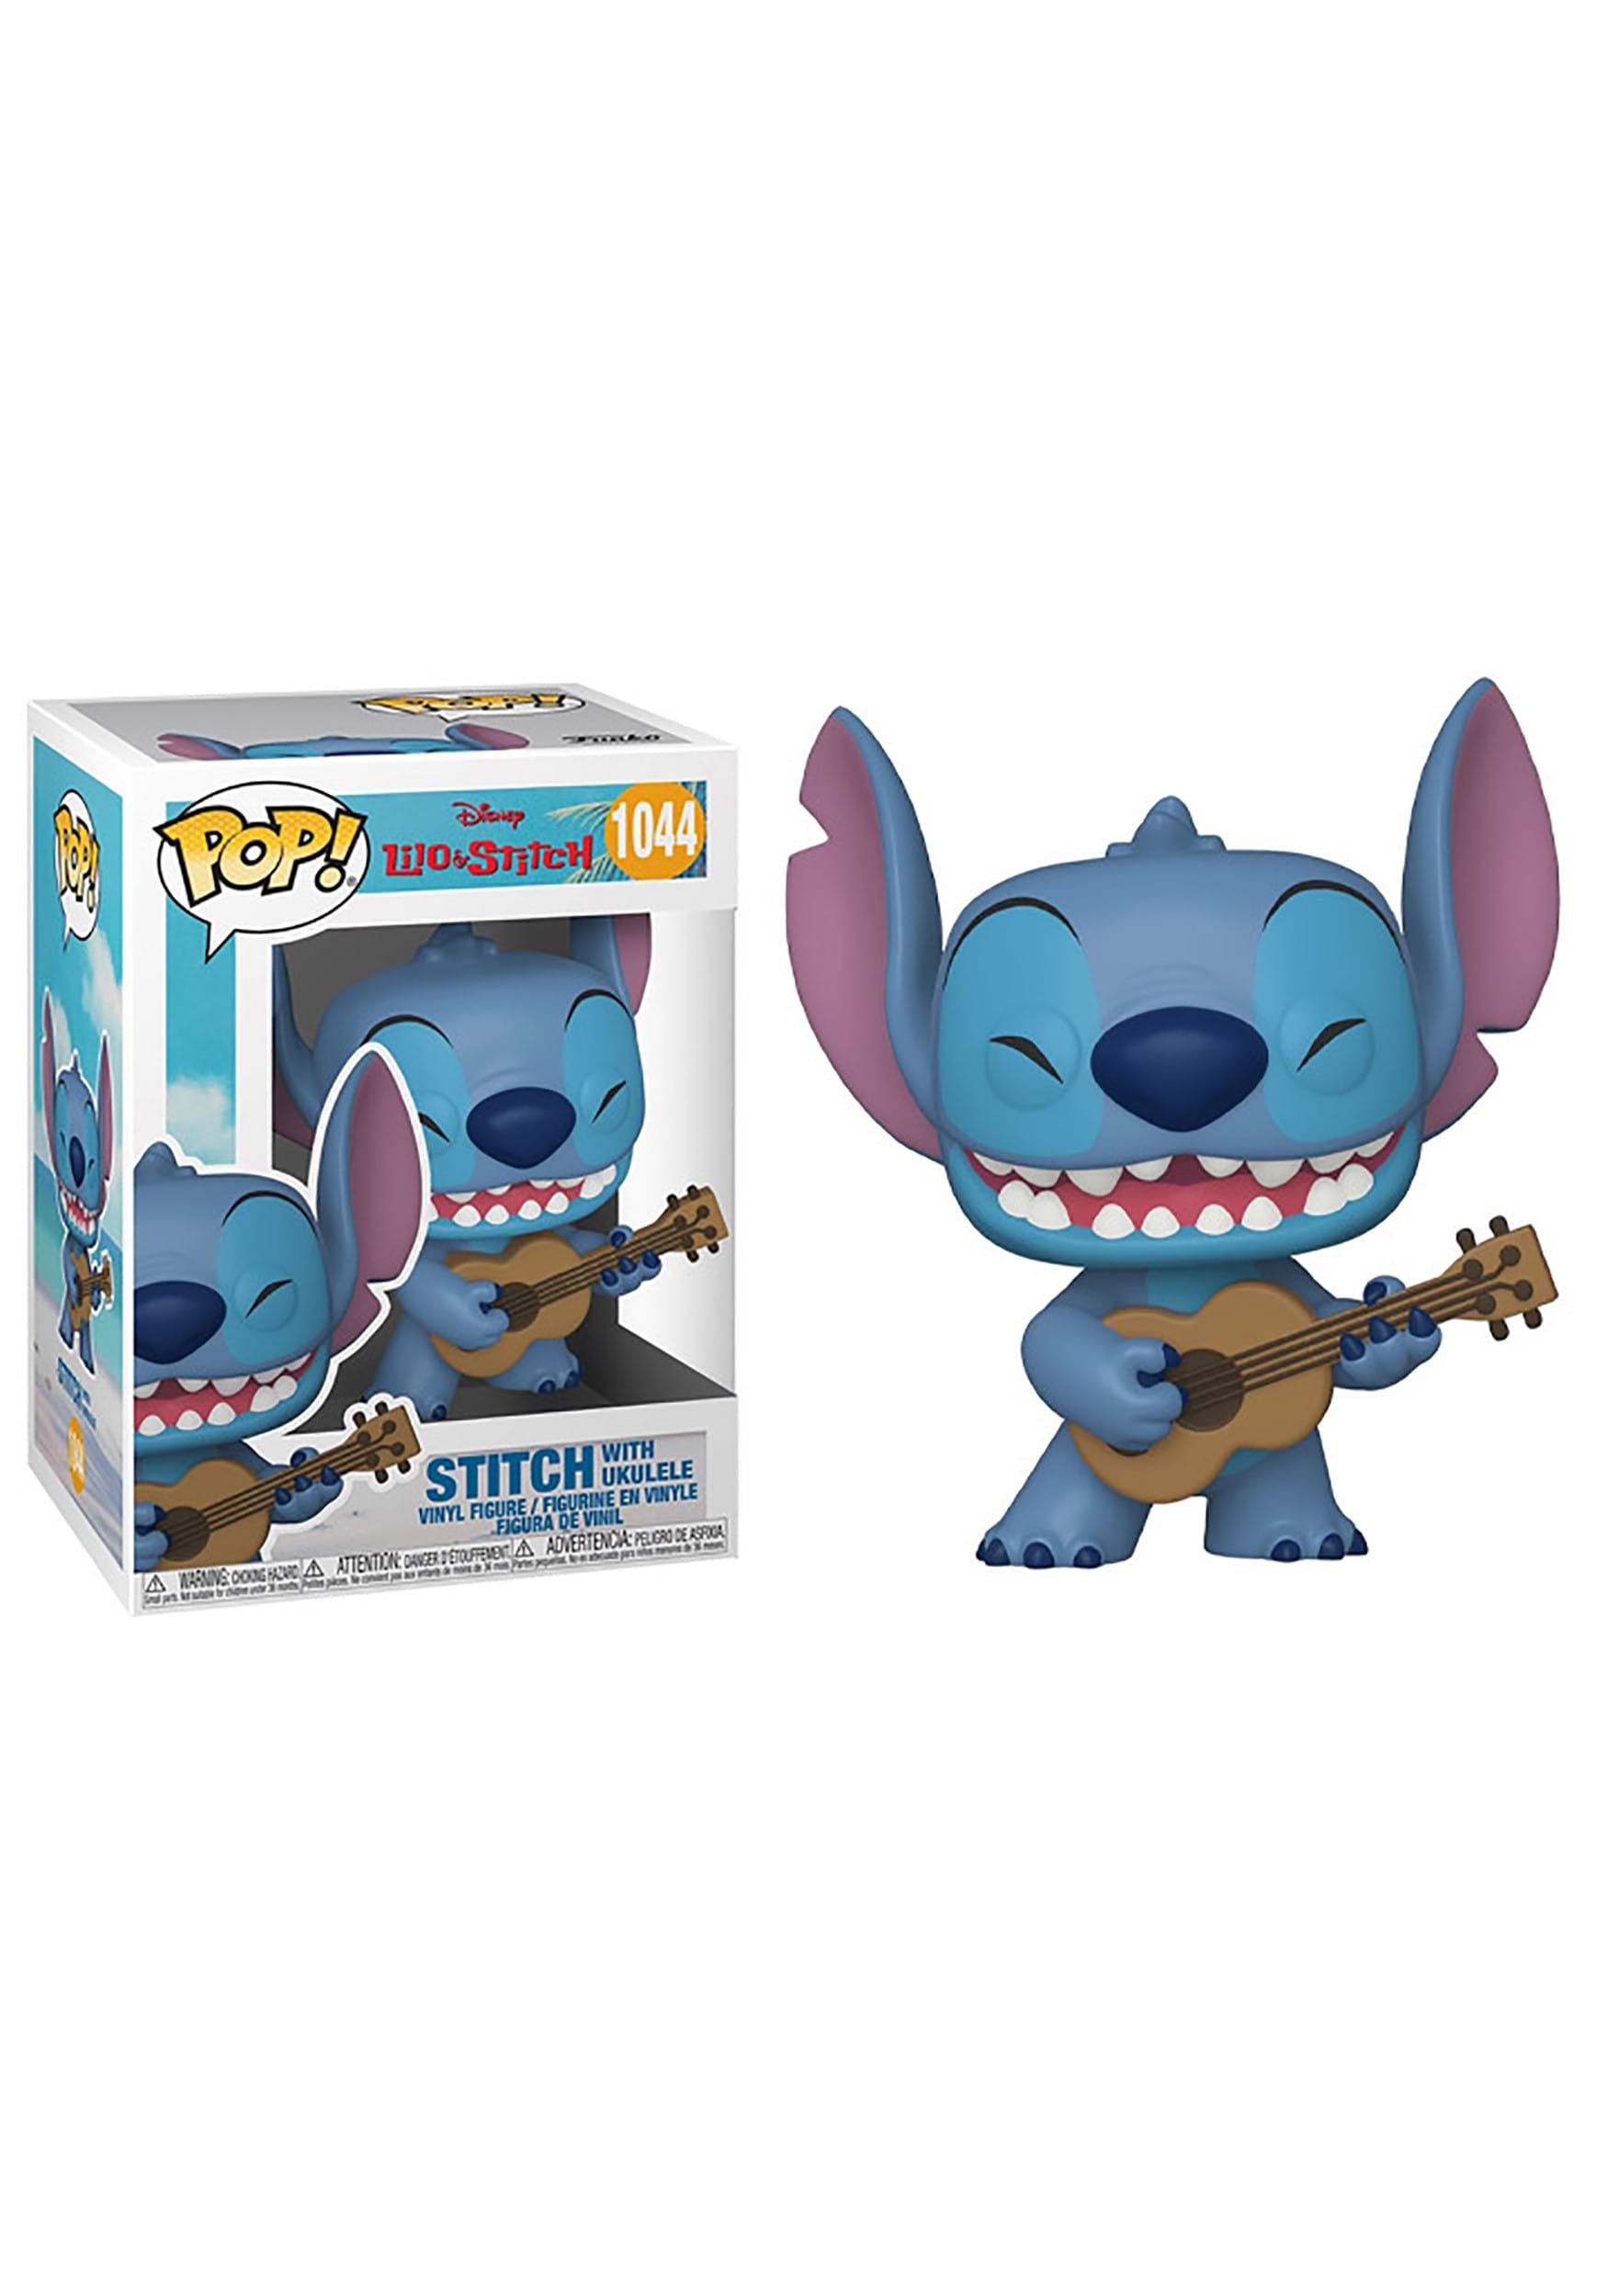 Elvis stitch Playing Guitar 10cm Collectible Figure Toys Gifts funko#pop 